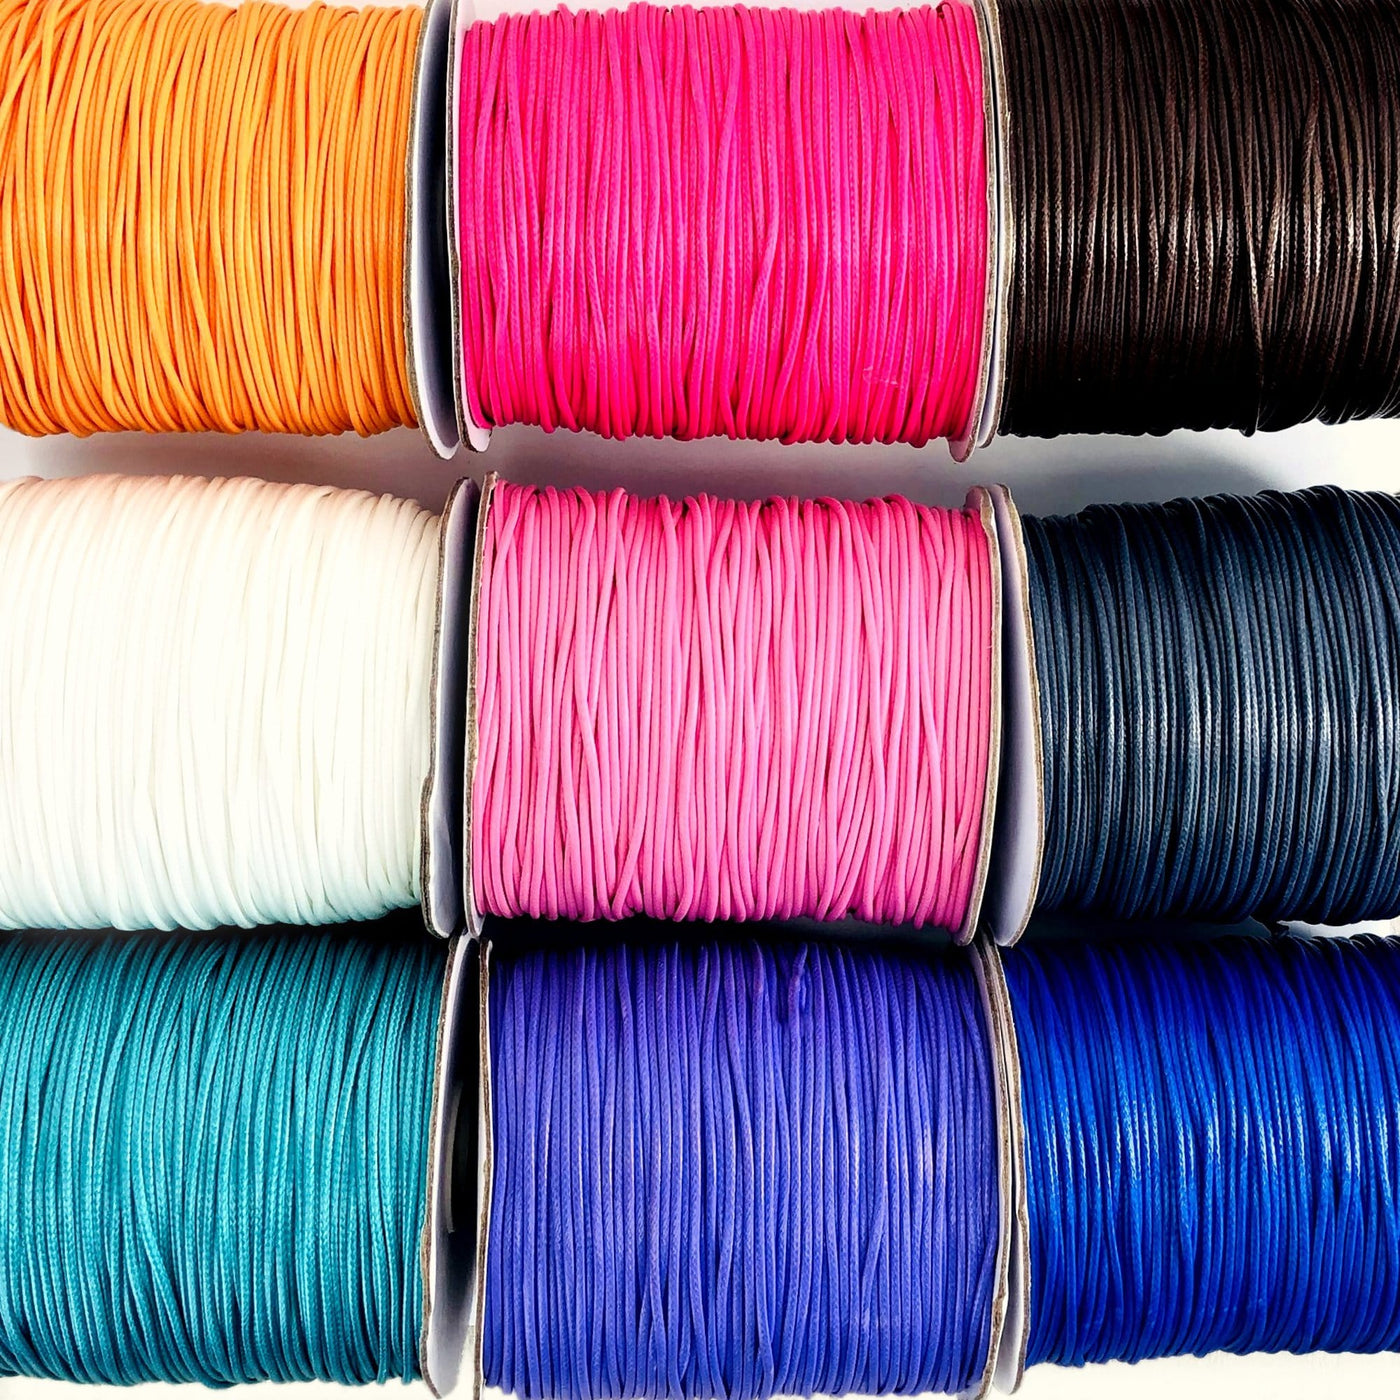 multiple colored cord string spools displayed to show the differences in the options available 